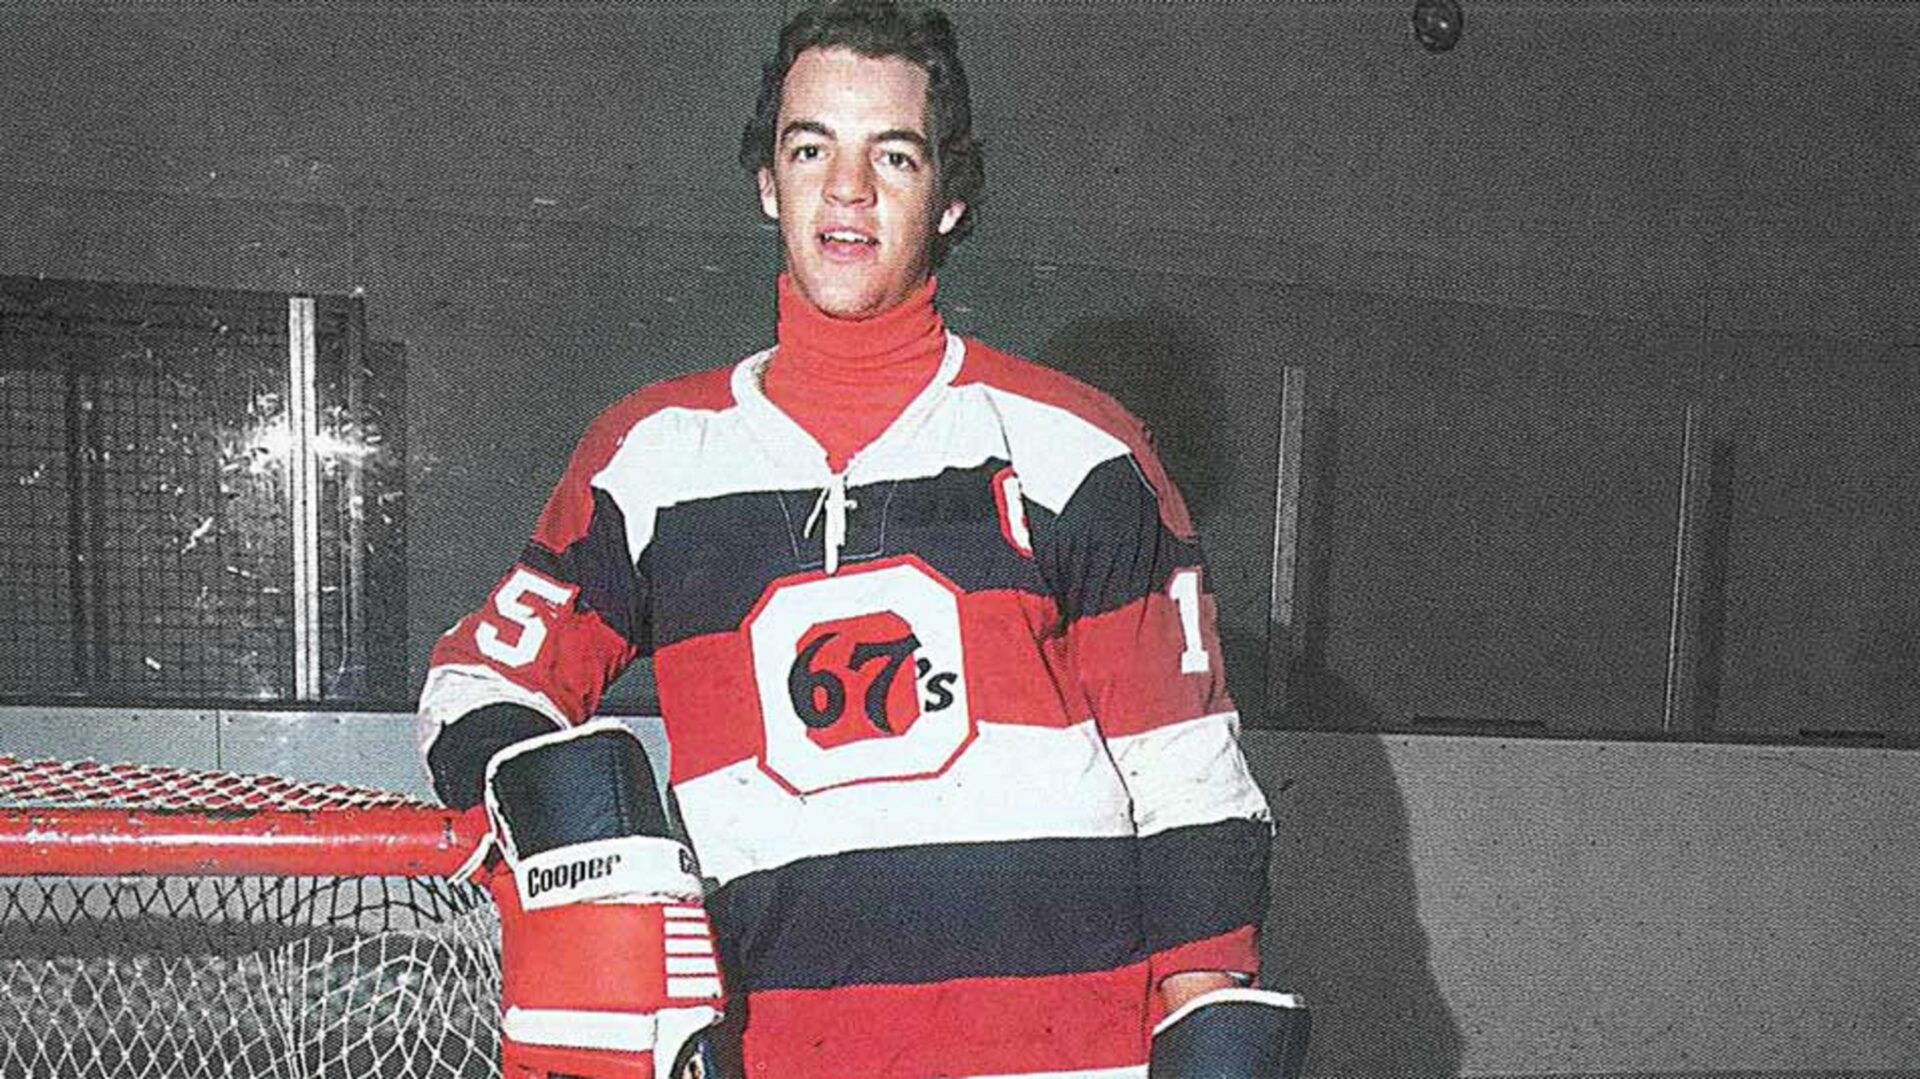 This Day In Hockey History-June 6, 1977-WHA plays $500,000 tune and 67’s Bobby Smith is listening